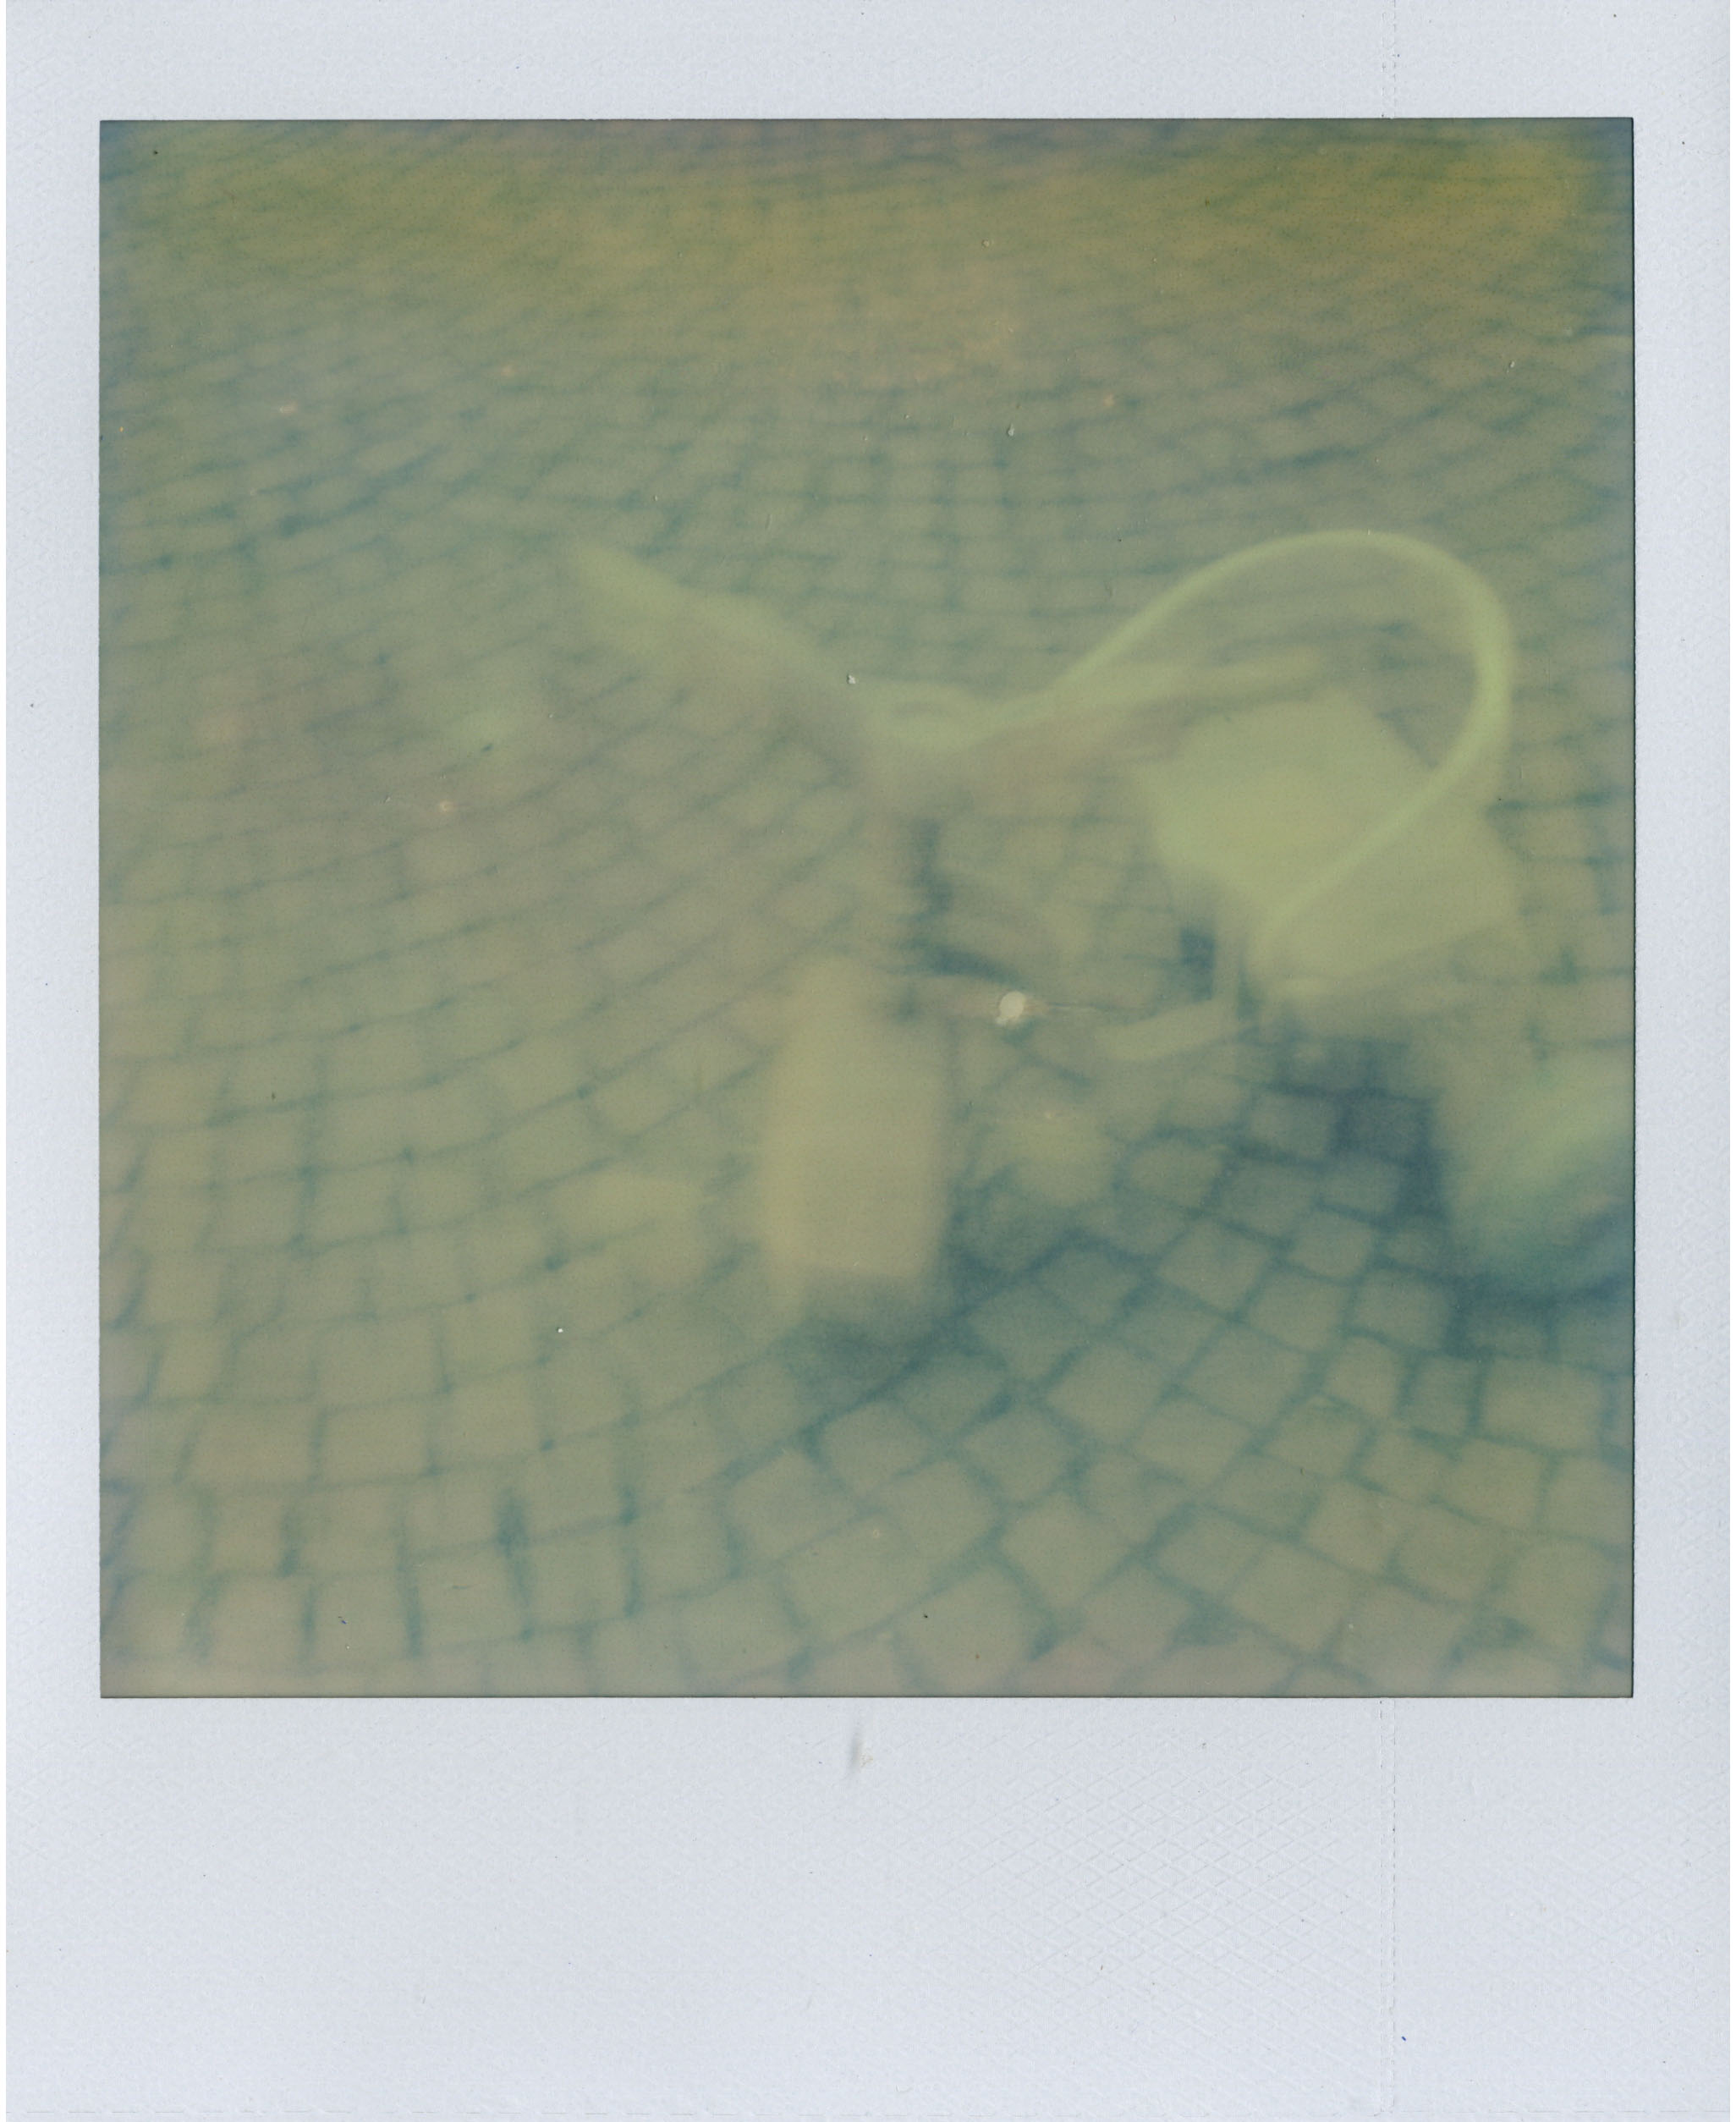 polaroid trycicle in italy